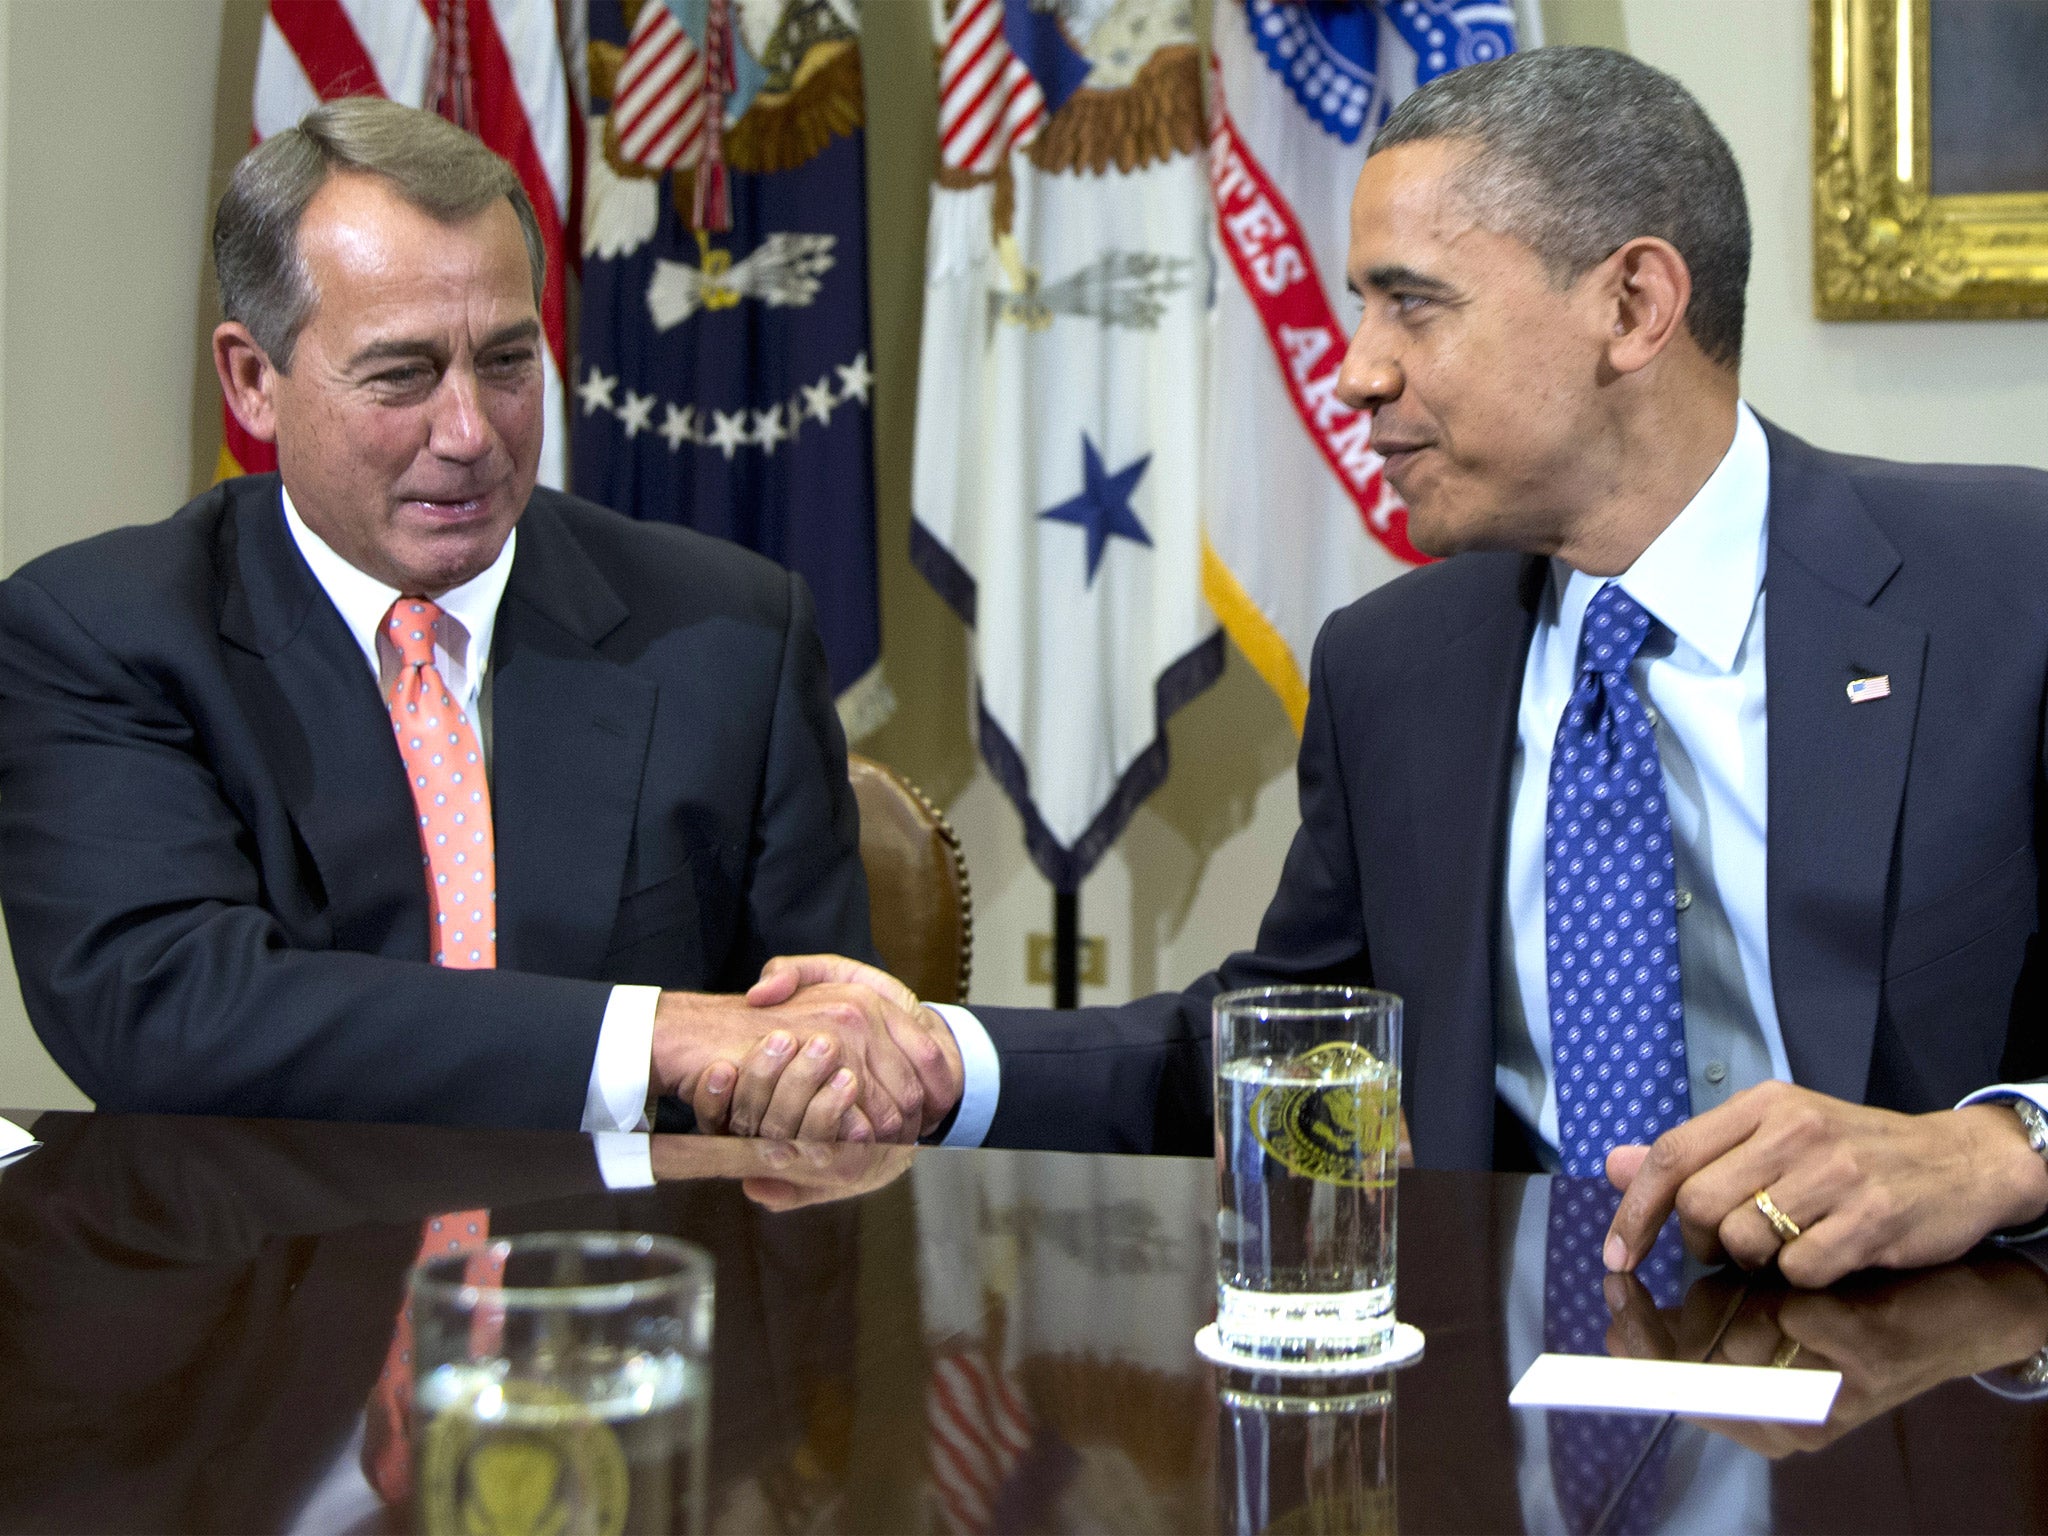 The House Speaker John Boehner, left, and President Barack Obama are seeking to resolve serious differences